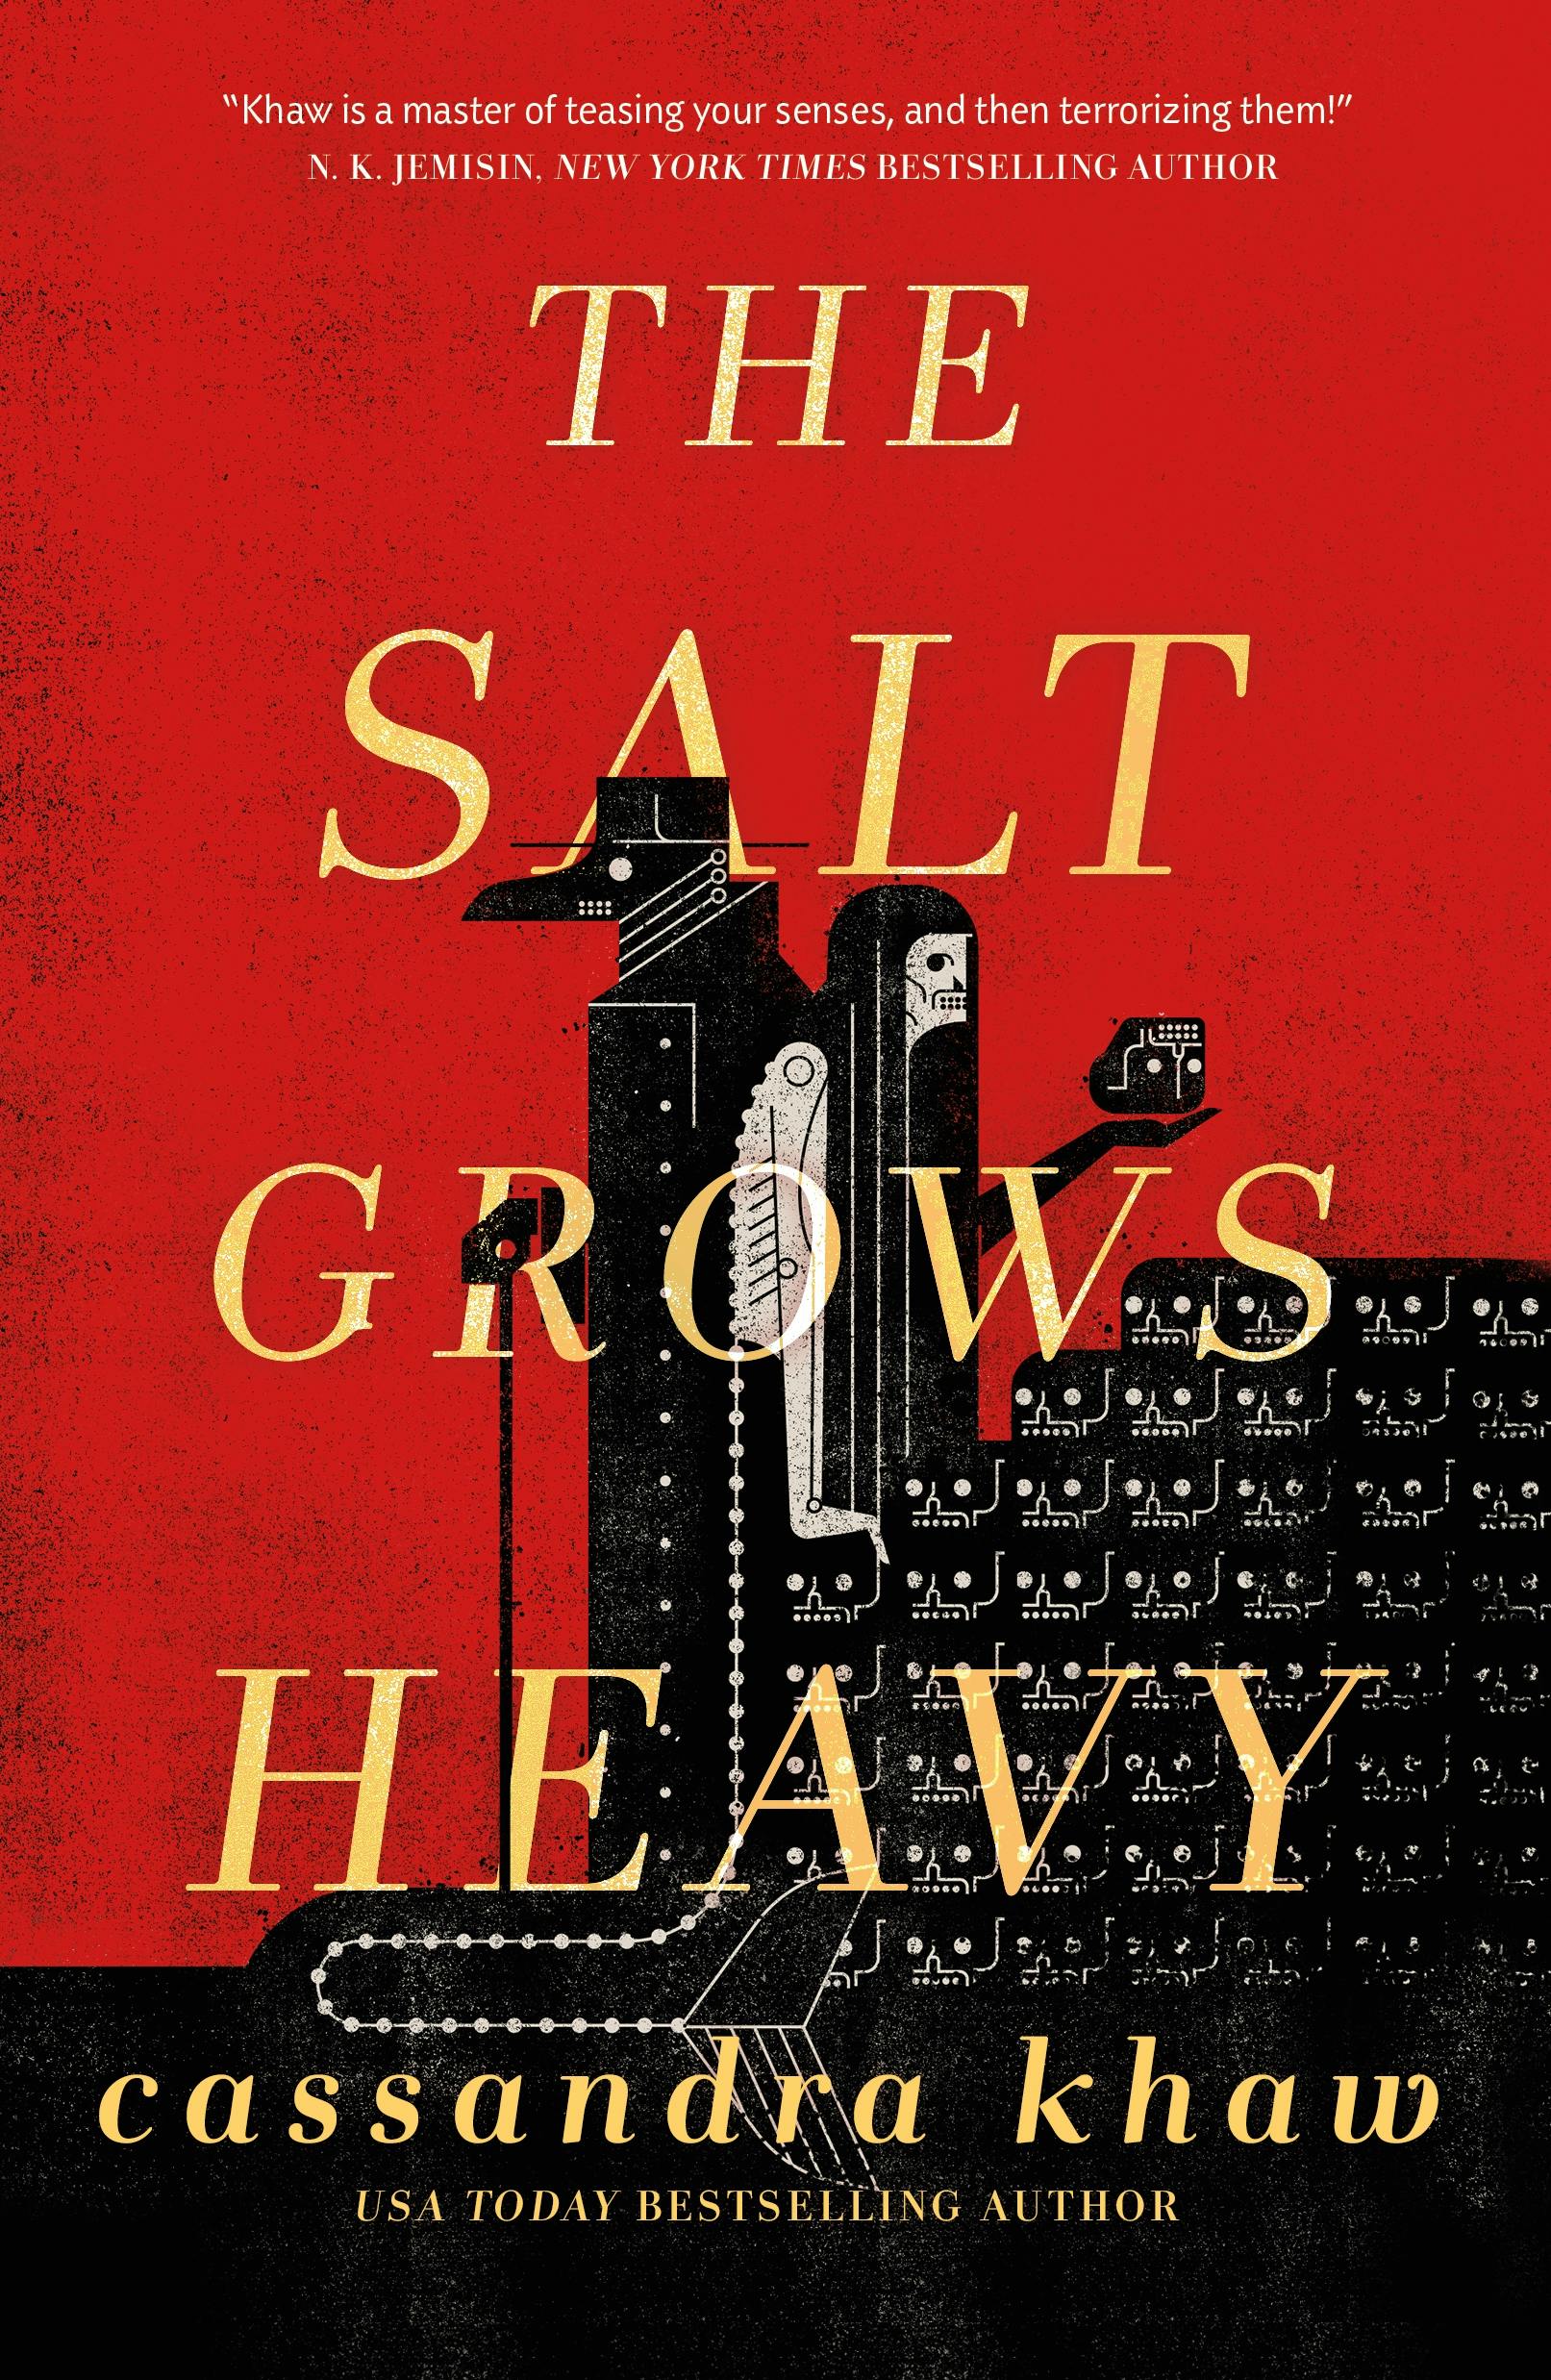 Cover for the book titled as: The Salt Grows Heavy